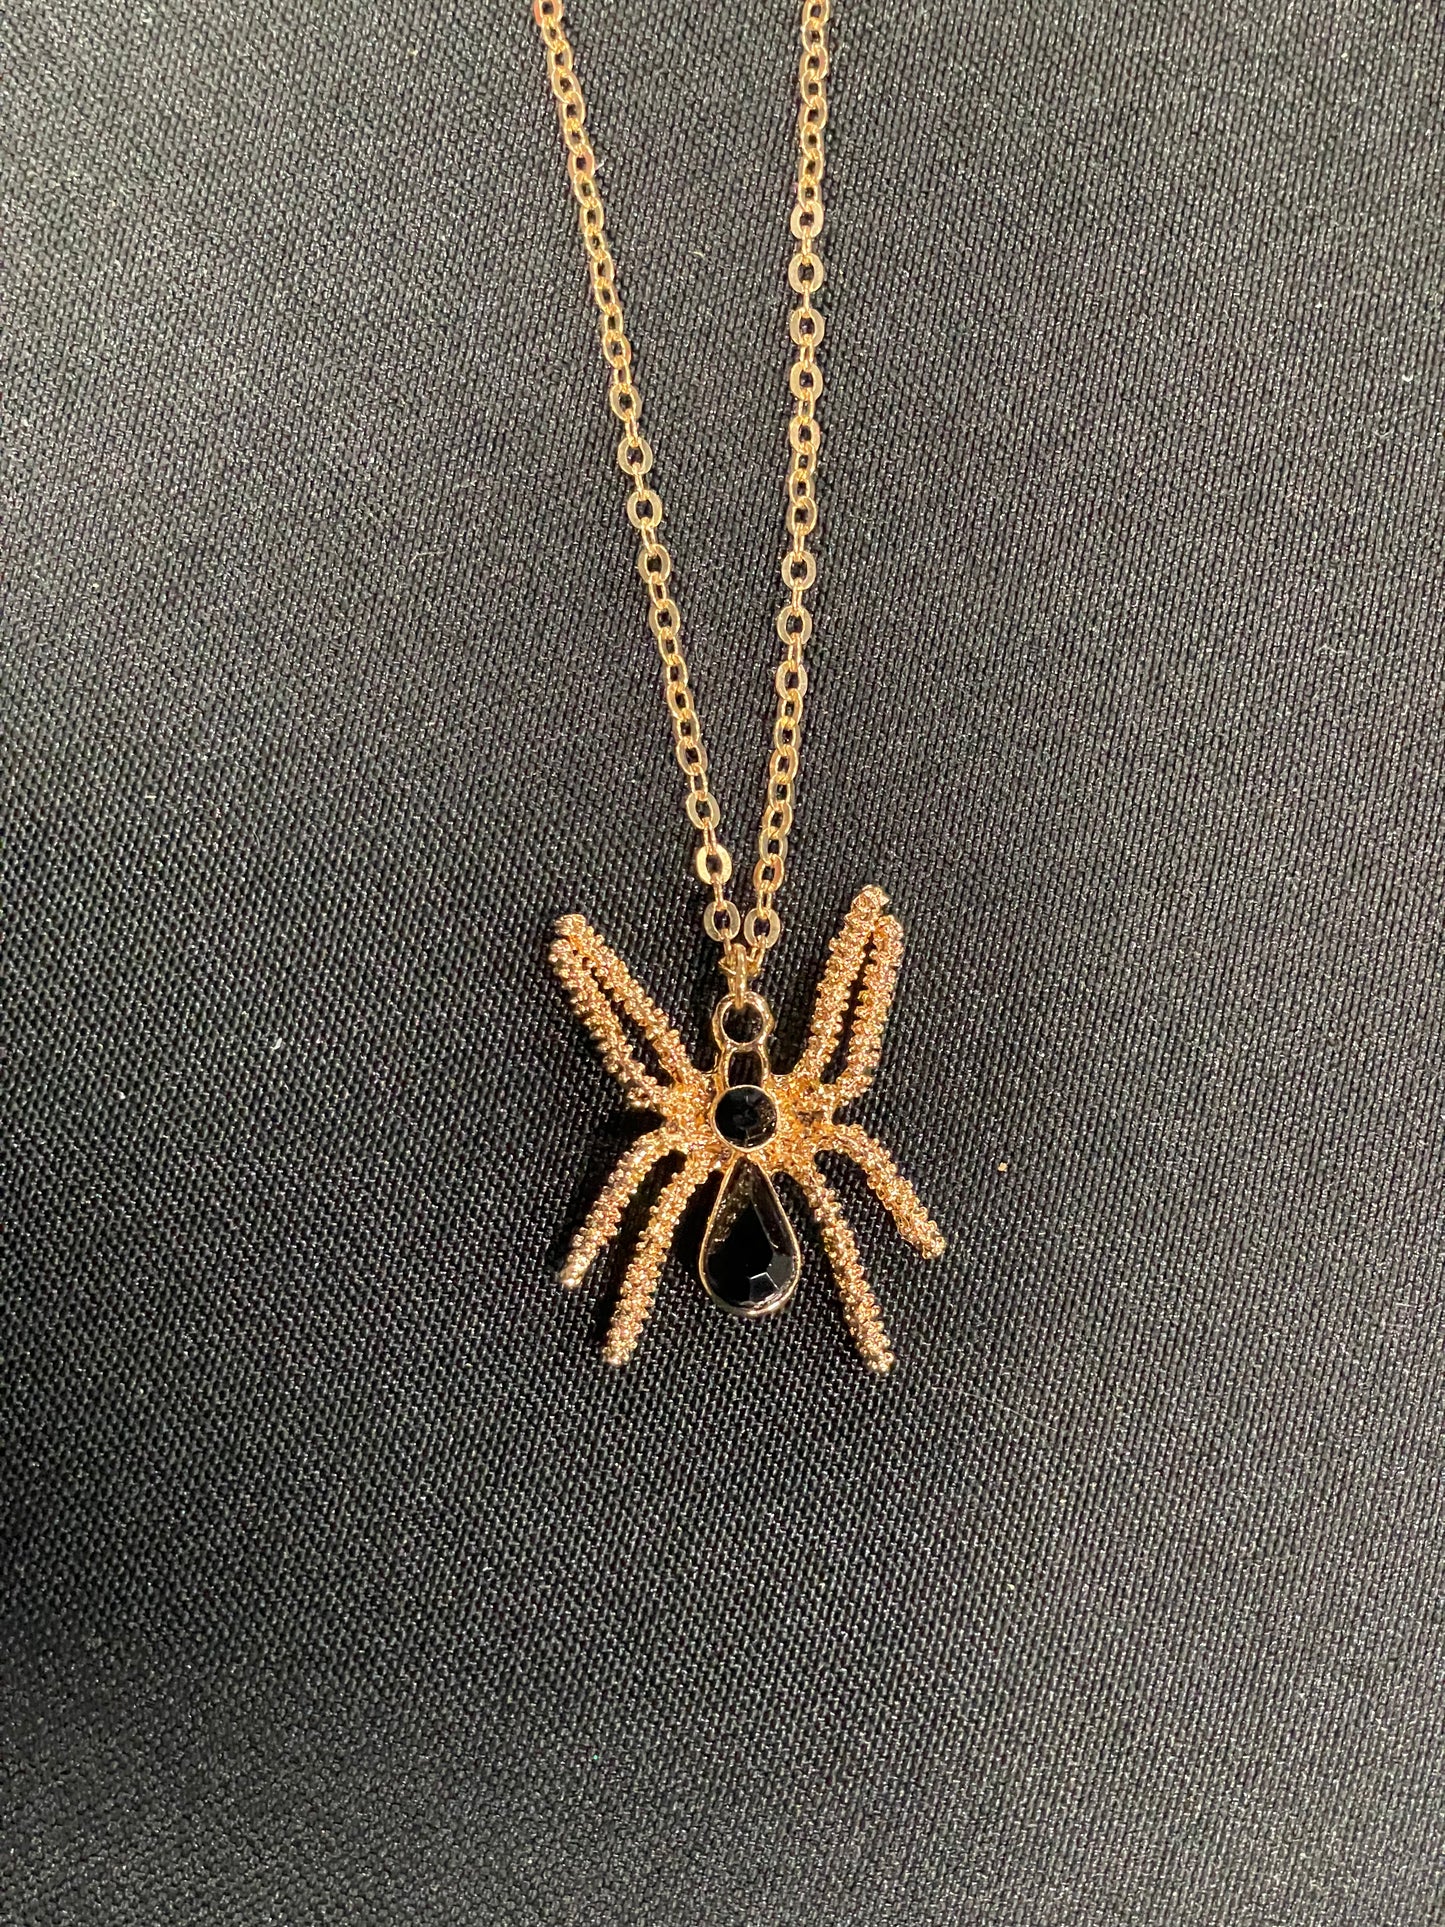 Necklace - gold and black spider